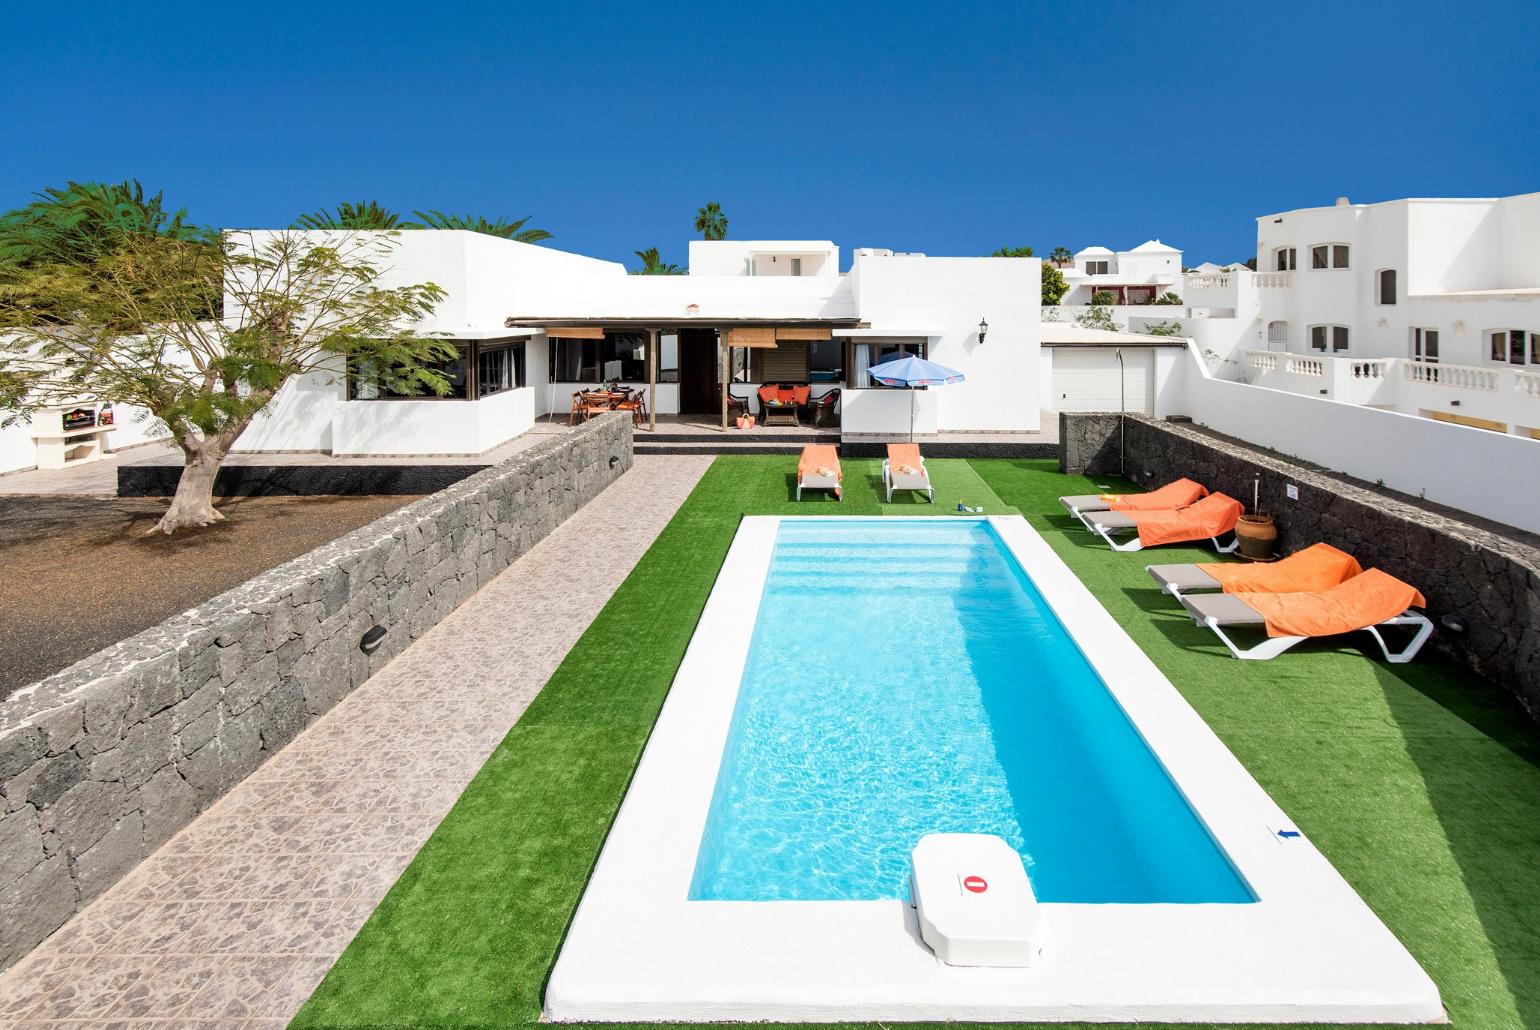 Private pool with terrace area